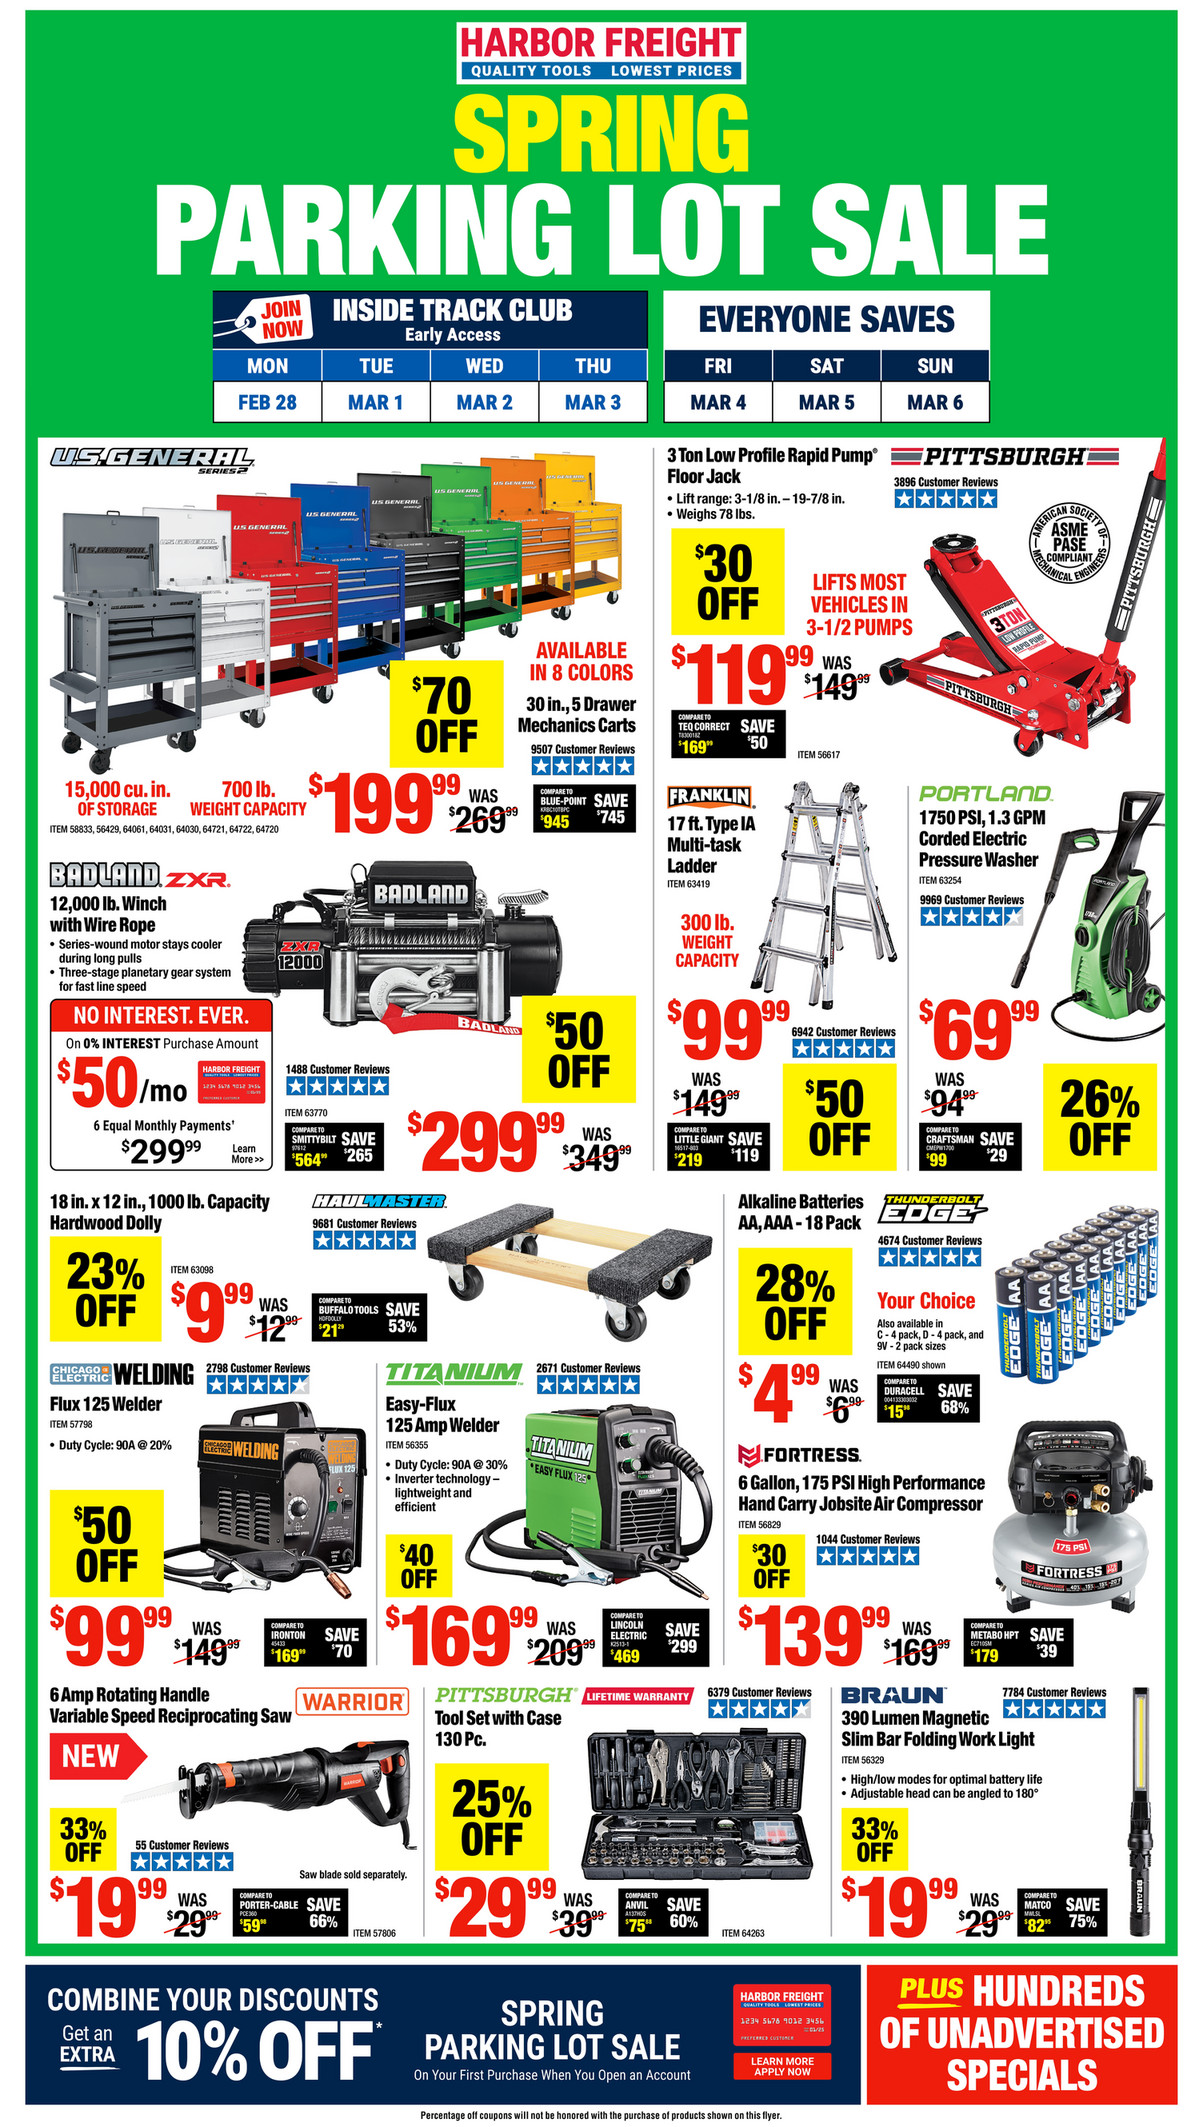 Harbor Freight Tools March PLS digital flyer_03042022 Page 1